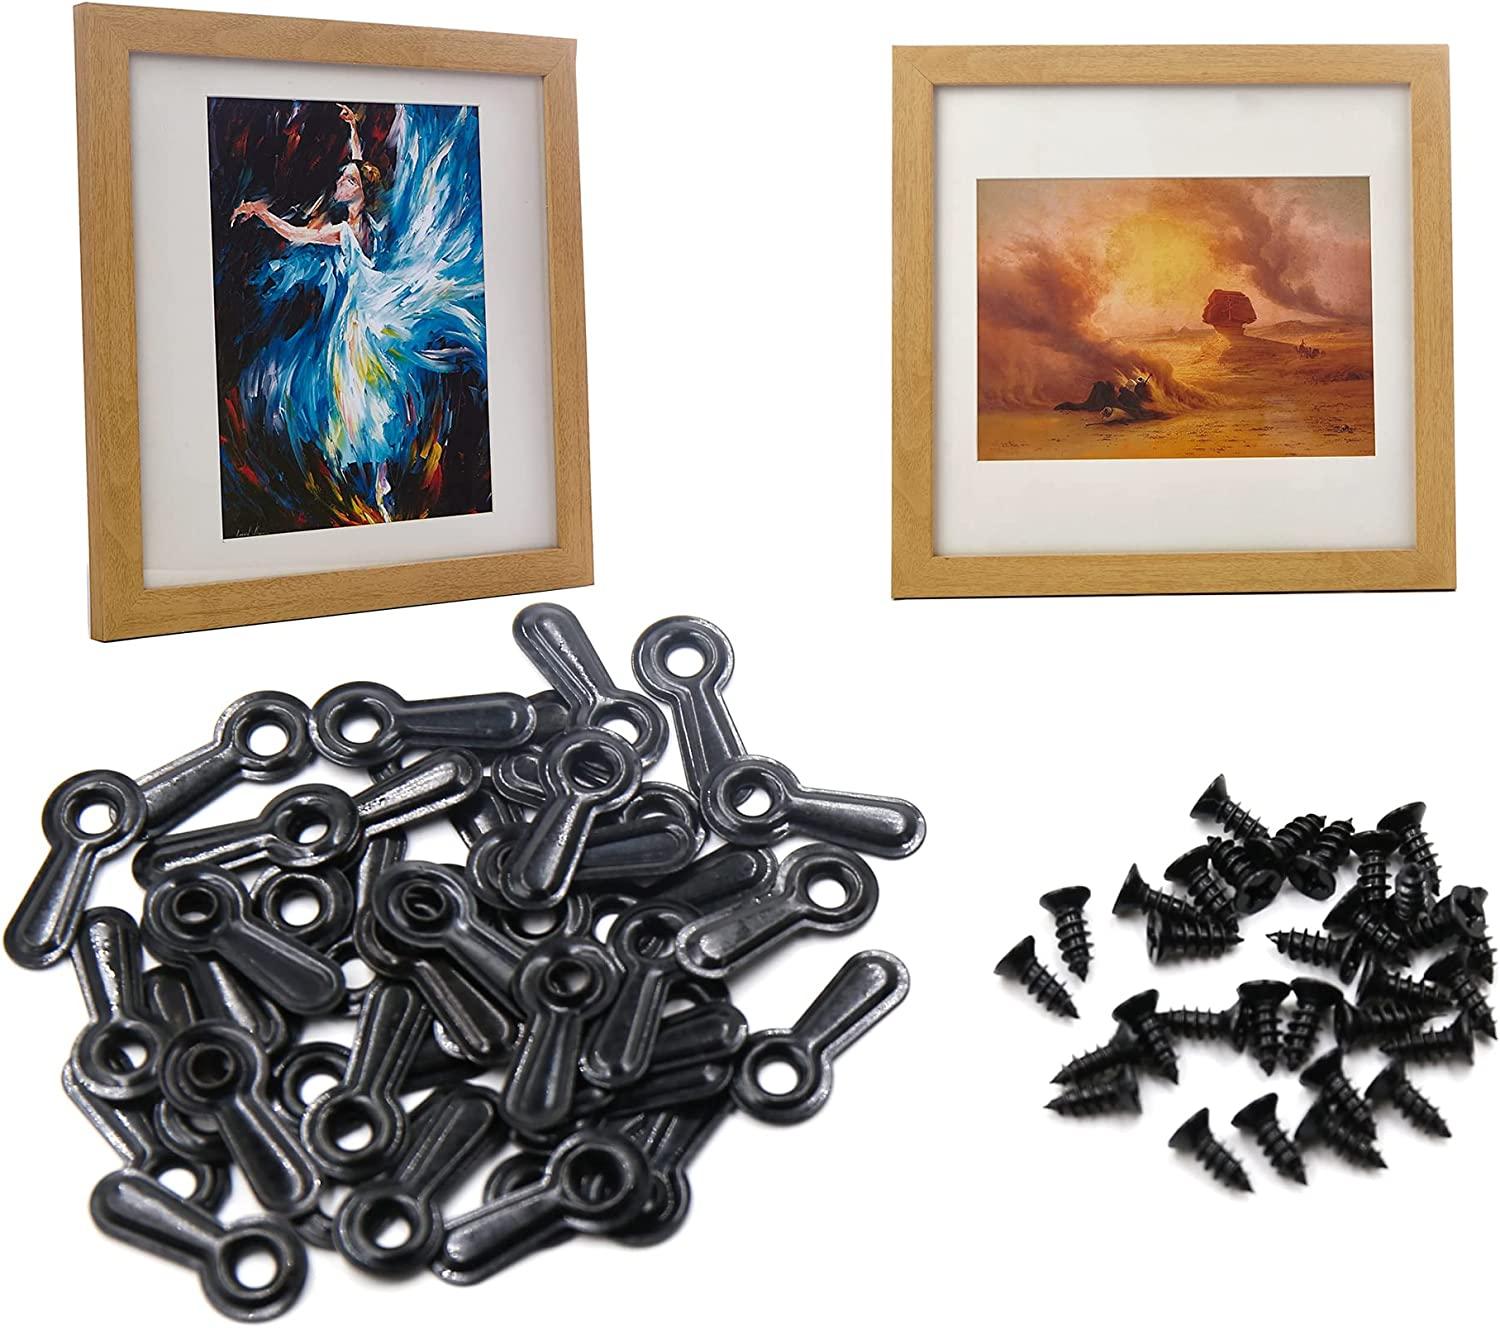 100 Pcs Metal Picture Frame Backing Clips Turn Button Fasteners